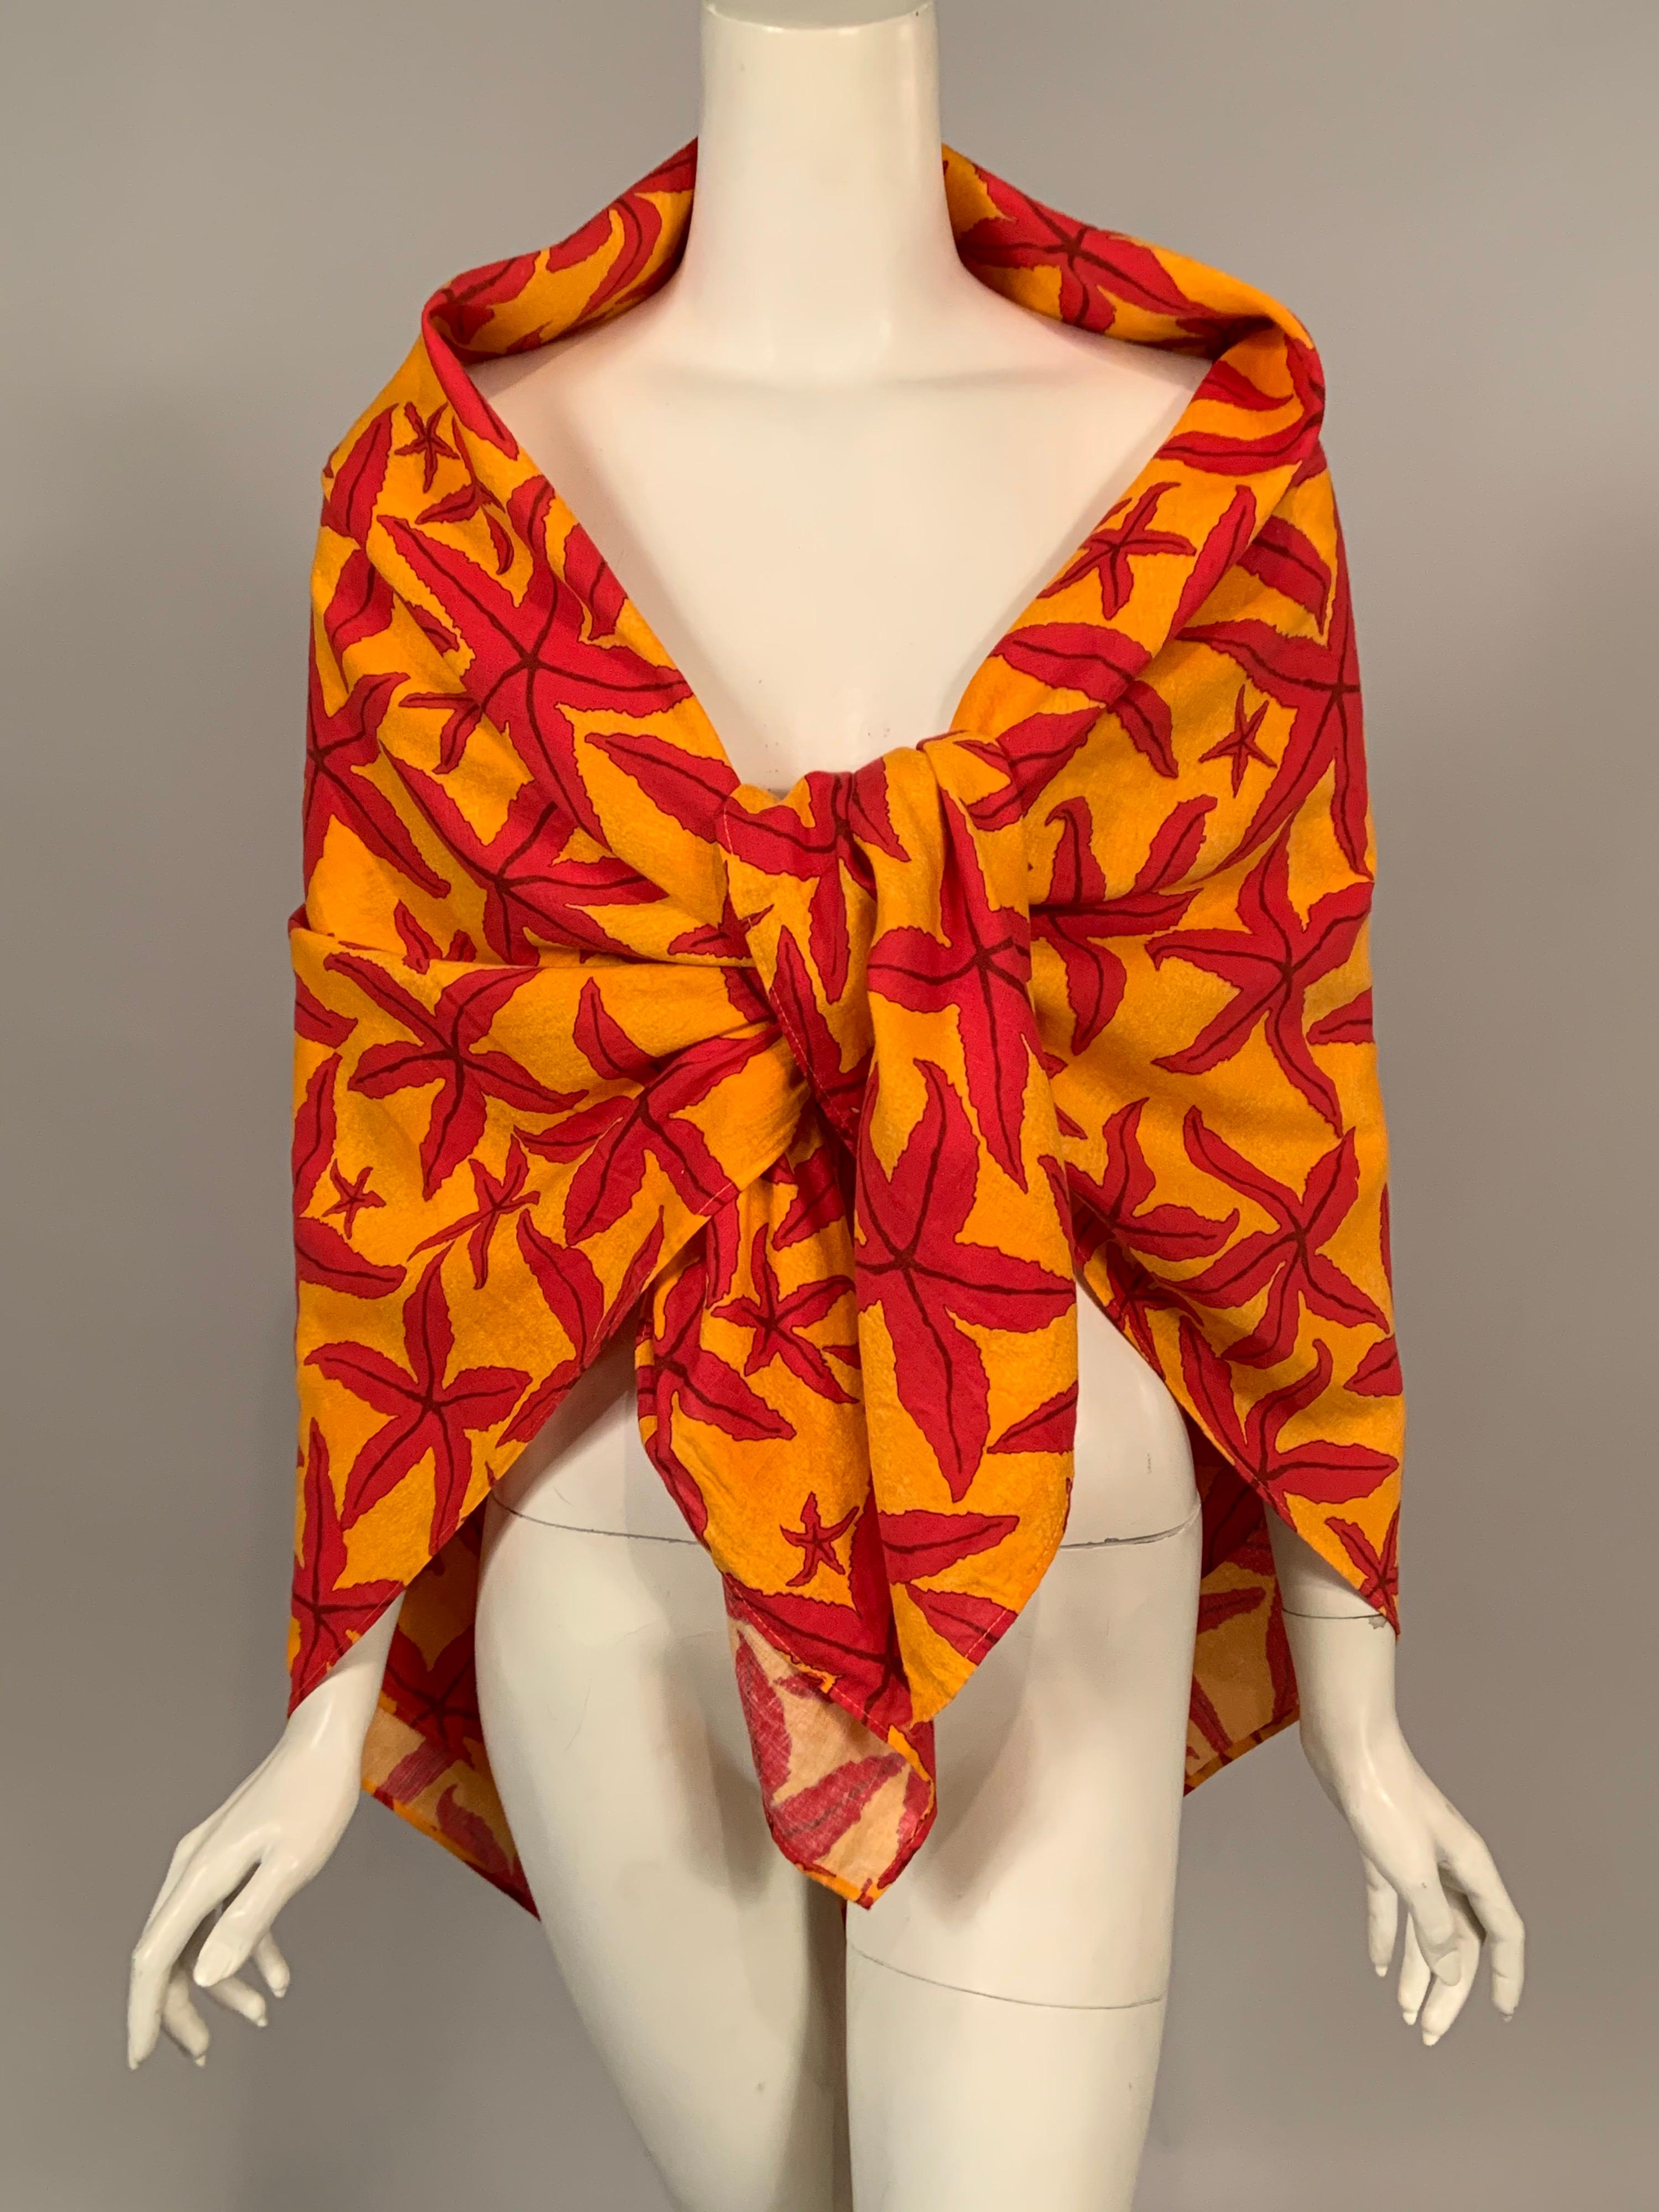 Hermes, Paris Tropical Starfish Patterned Red and Yellow Pareo, Wrap or Shawl 3